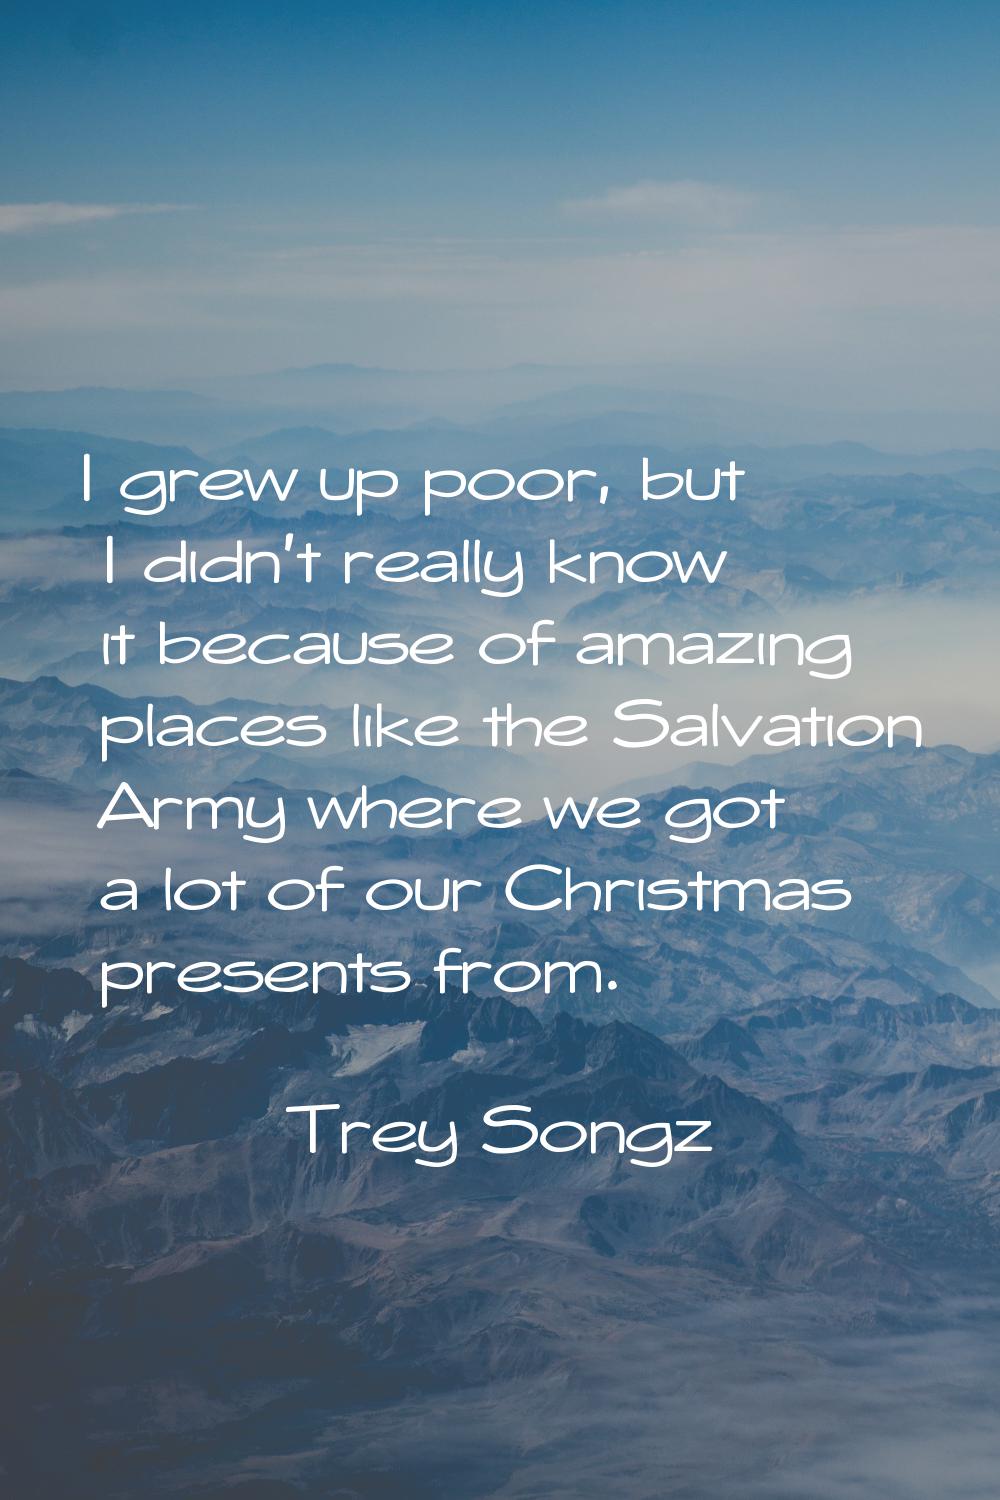 I grew up poor, but I didn't really know it because of amazing places like the Salvation Army where